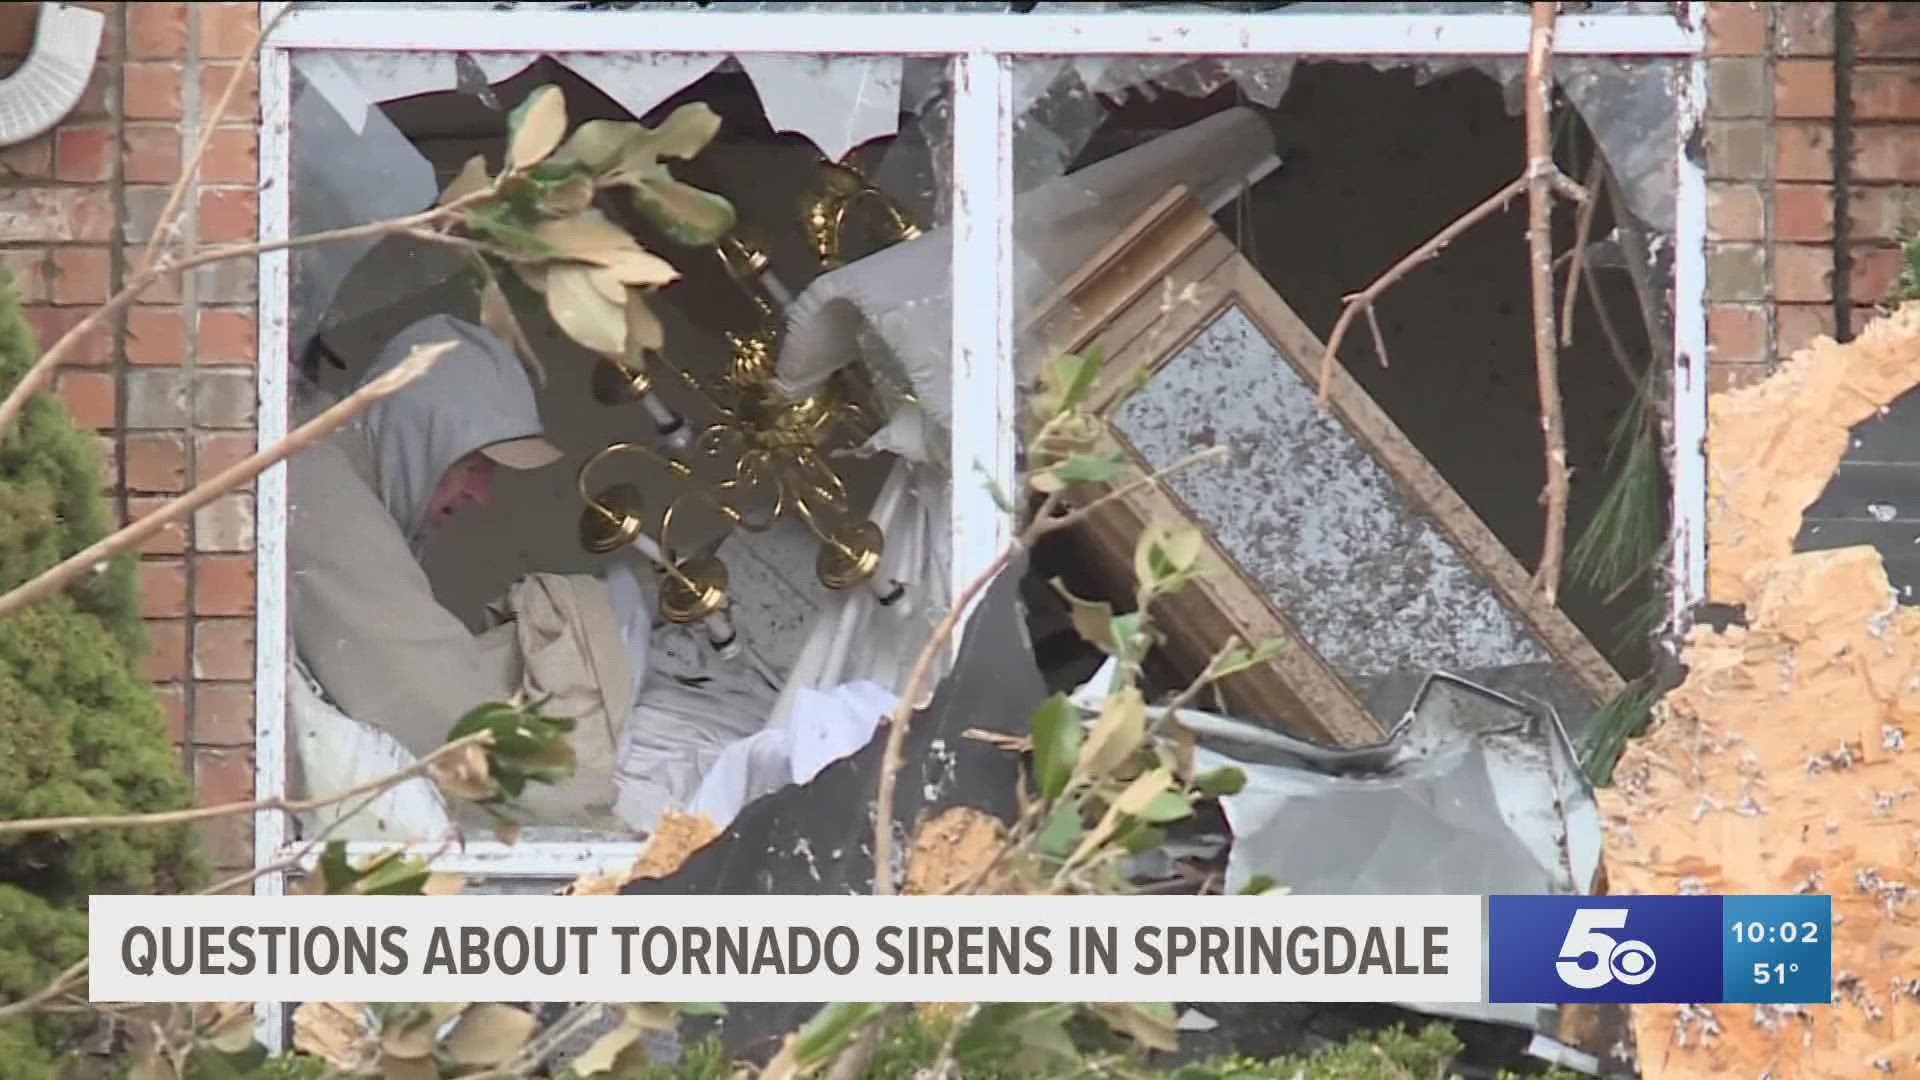 Wednesday morning's tornado struck with little warning, residents debate if the current system or sirens would help.